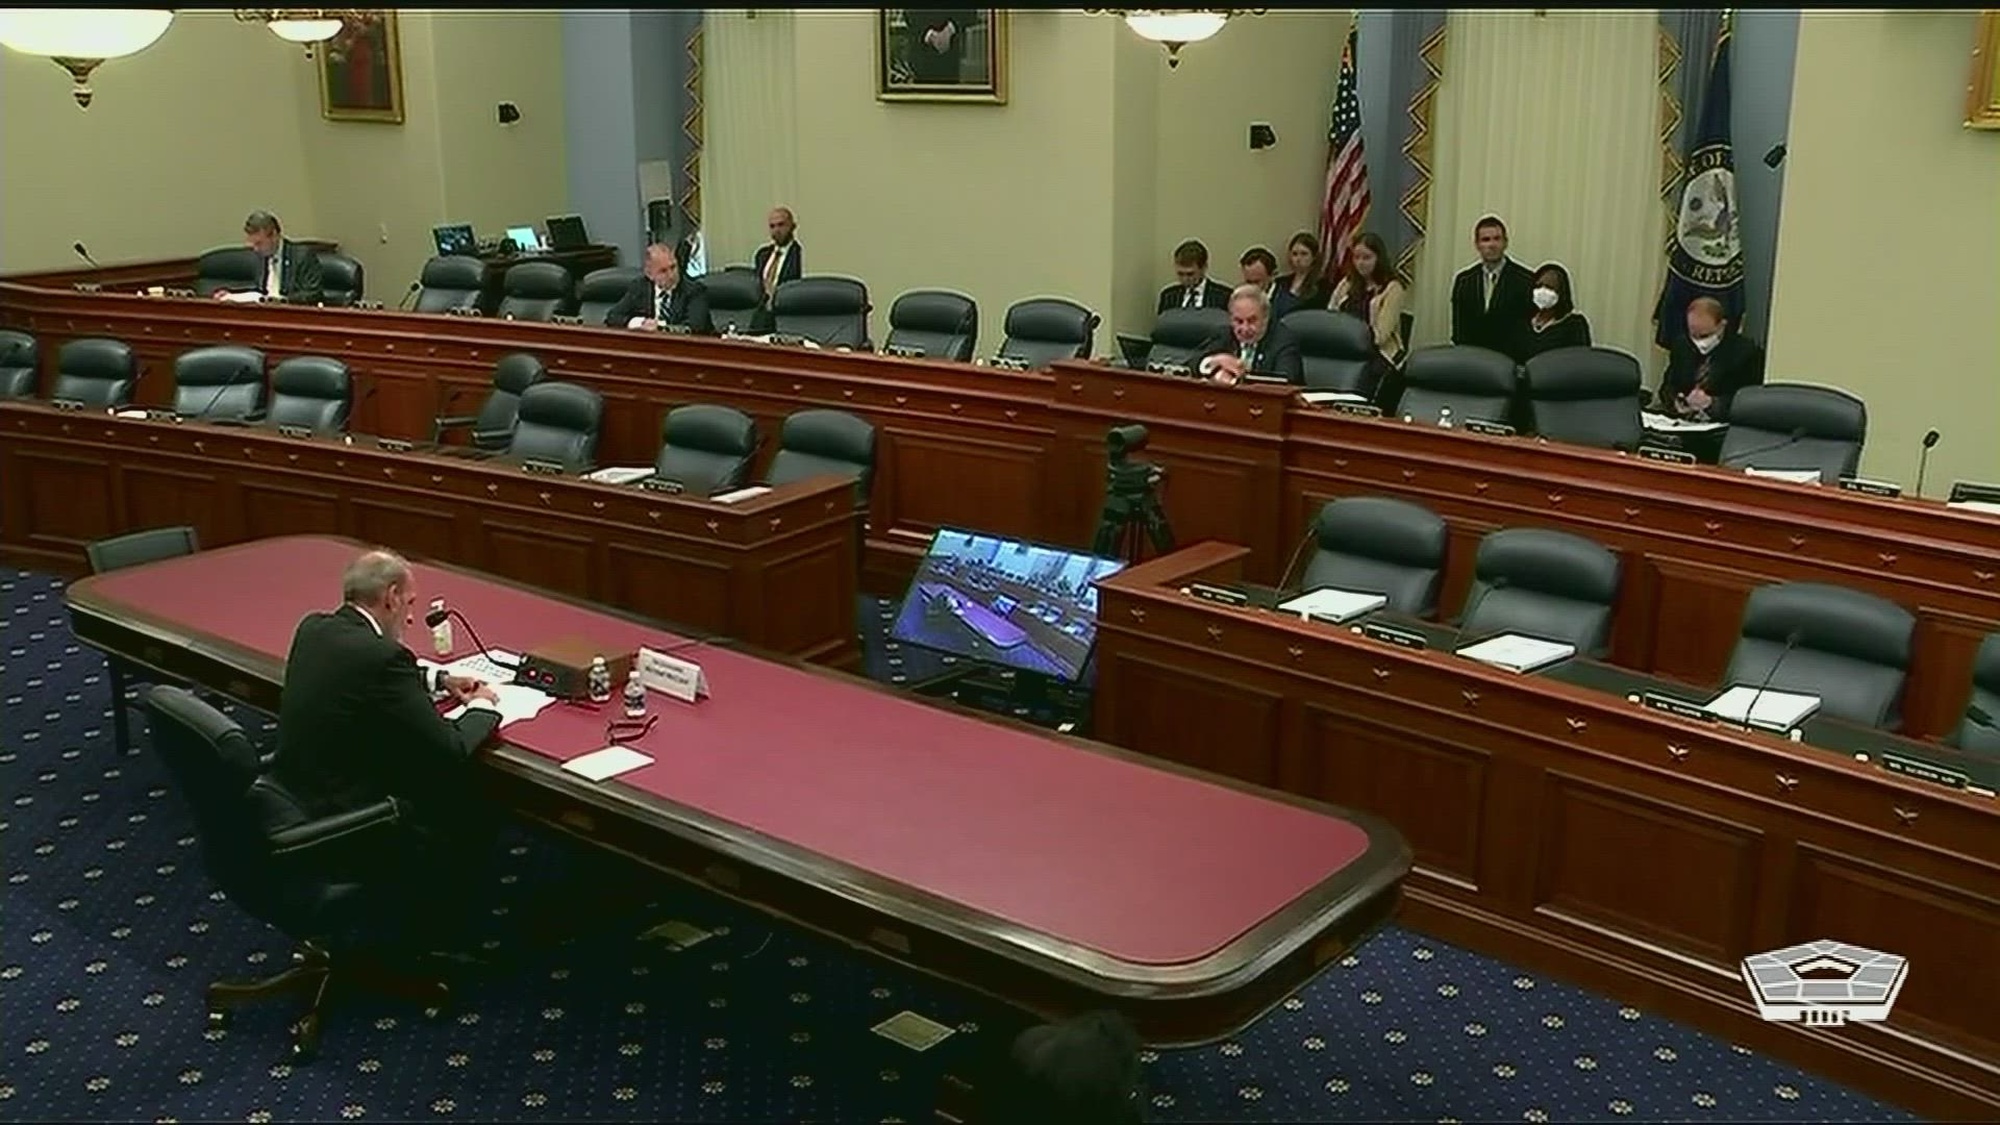 Michael J. McCord, DOD’s undersecretary of defense (comptroller)/chief financial officer, testifies about the Defense Department’s fiscal 2023 budget proposal before the House Committee on the Budget.